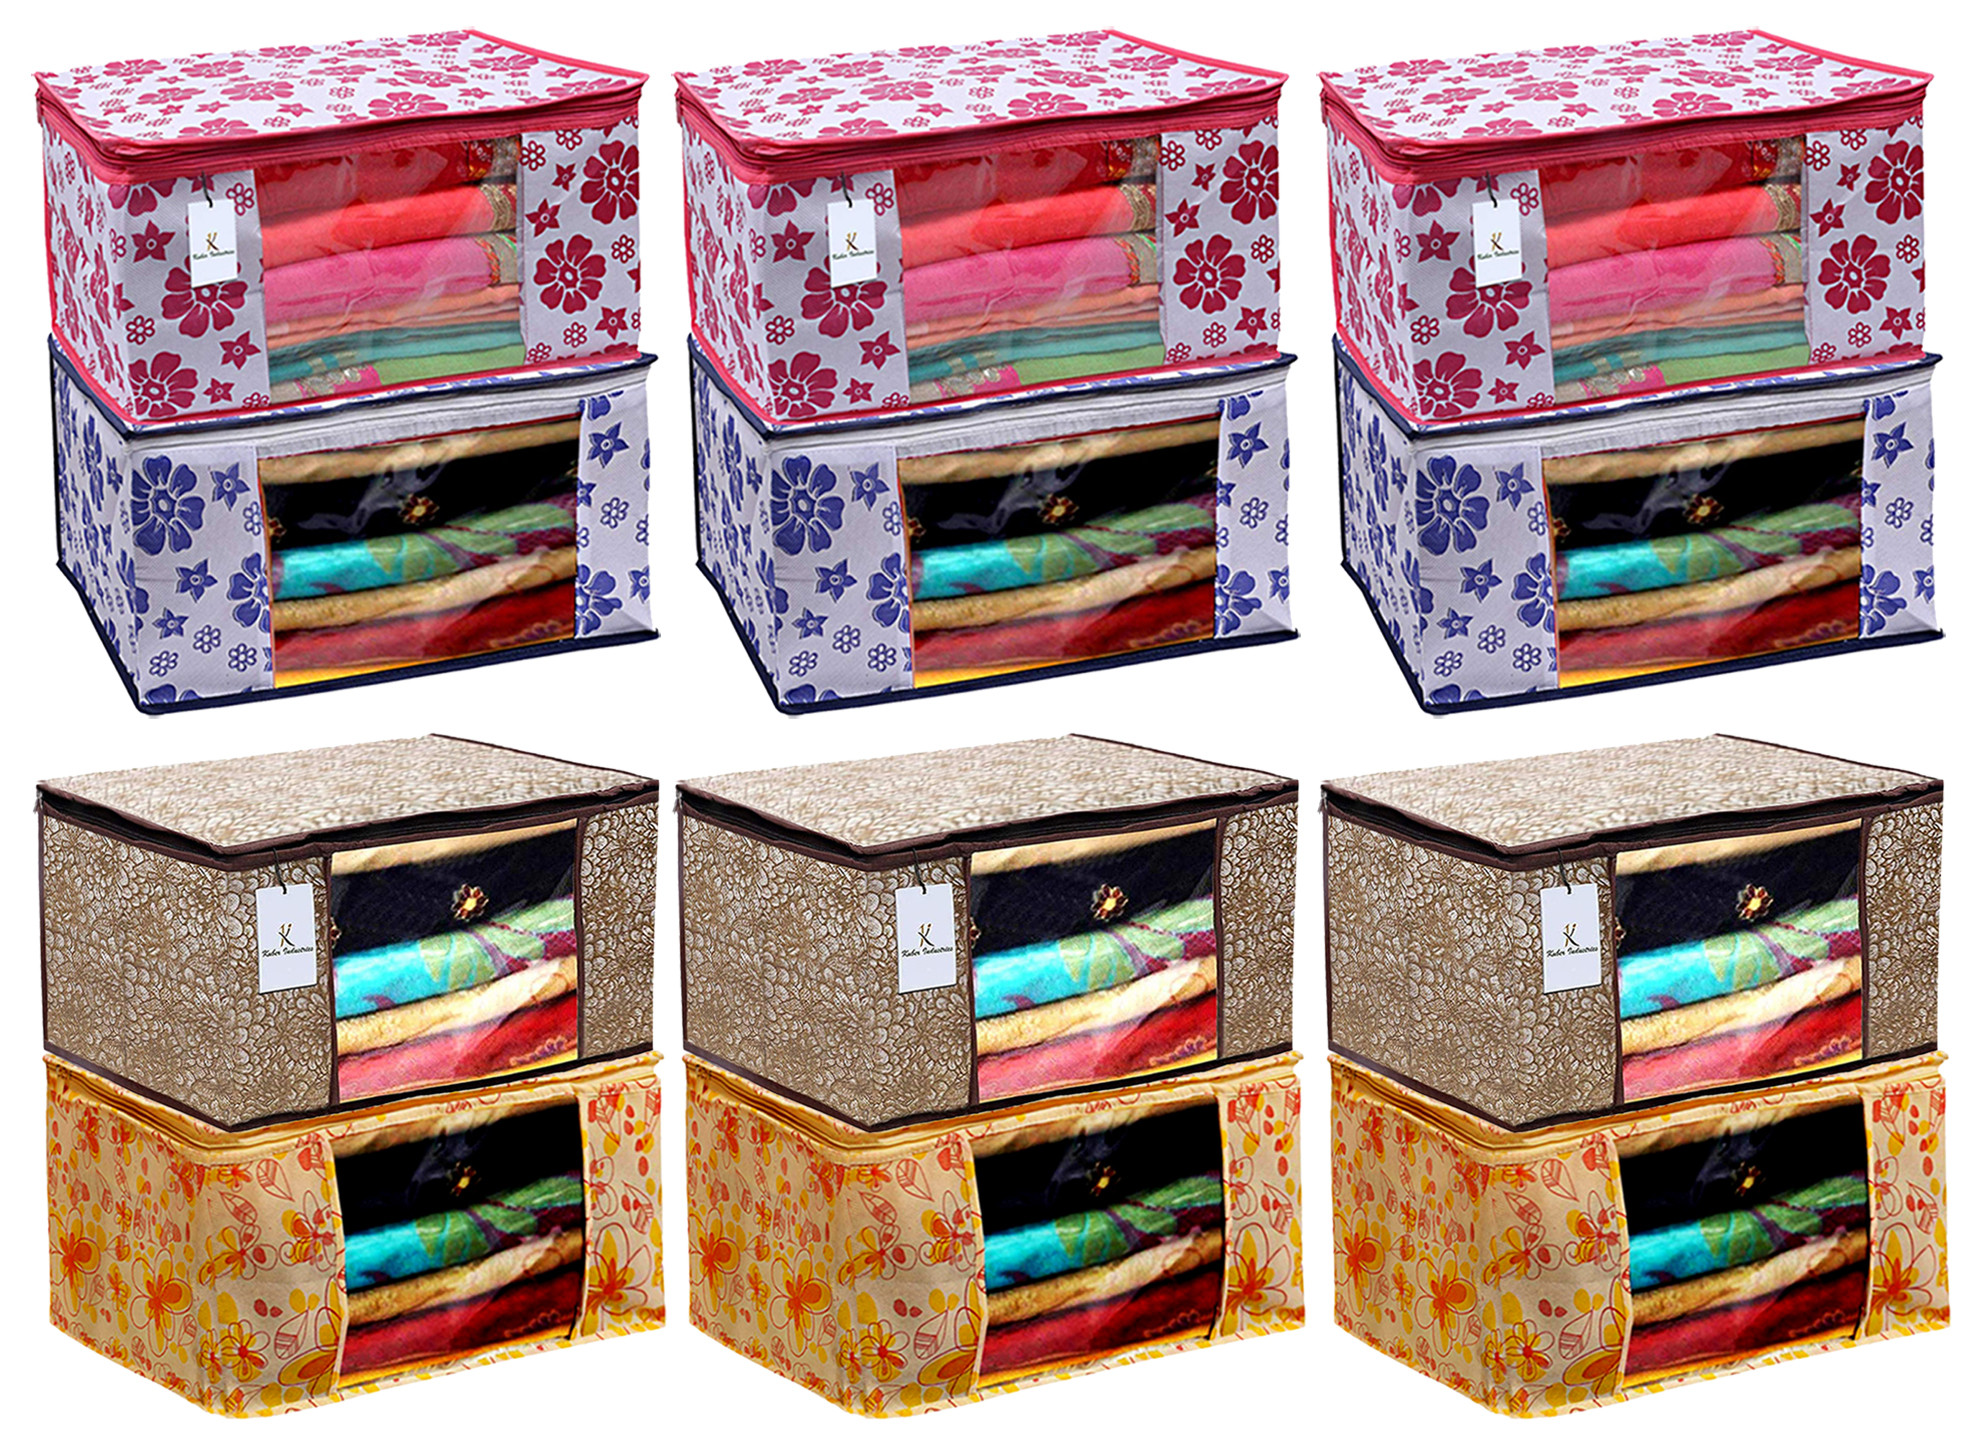 Kuber Industries Metalic & Flower Printed Non Woven Fabric Saree Cover Set with Transparent Window, Extra Large, Pink & Blue & Ivory Red & Golden Brown -CTKTC40845